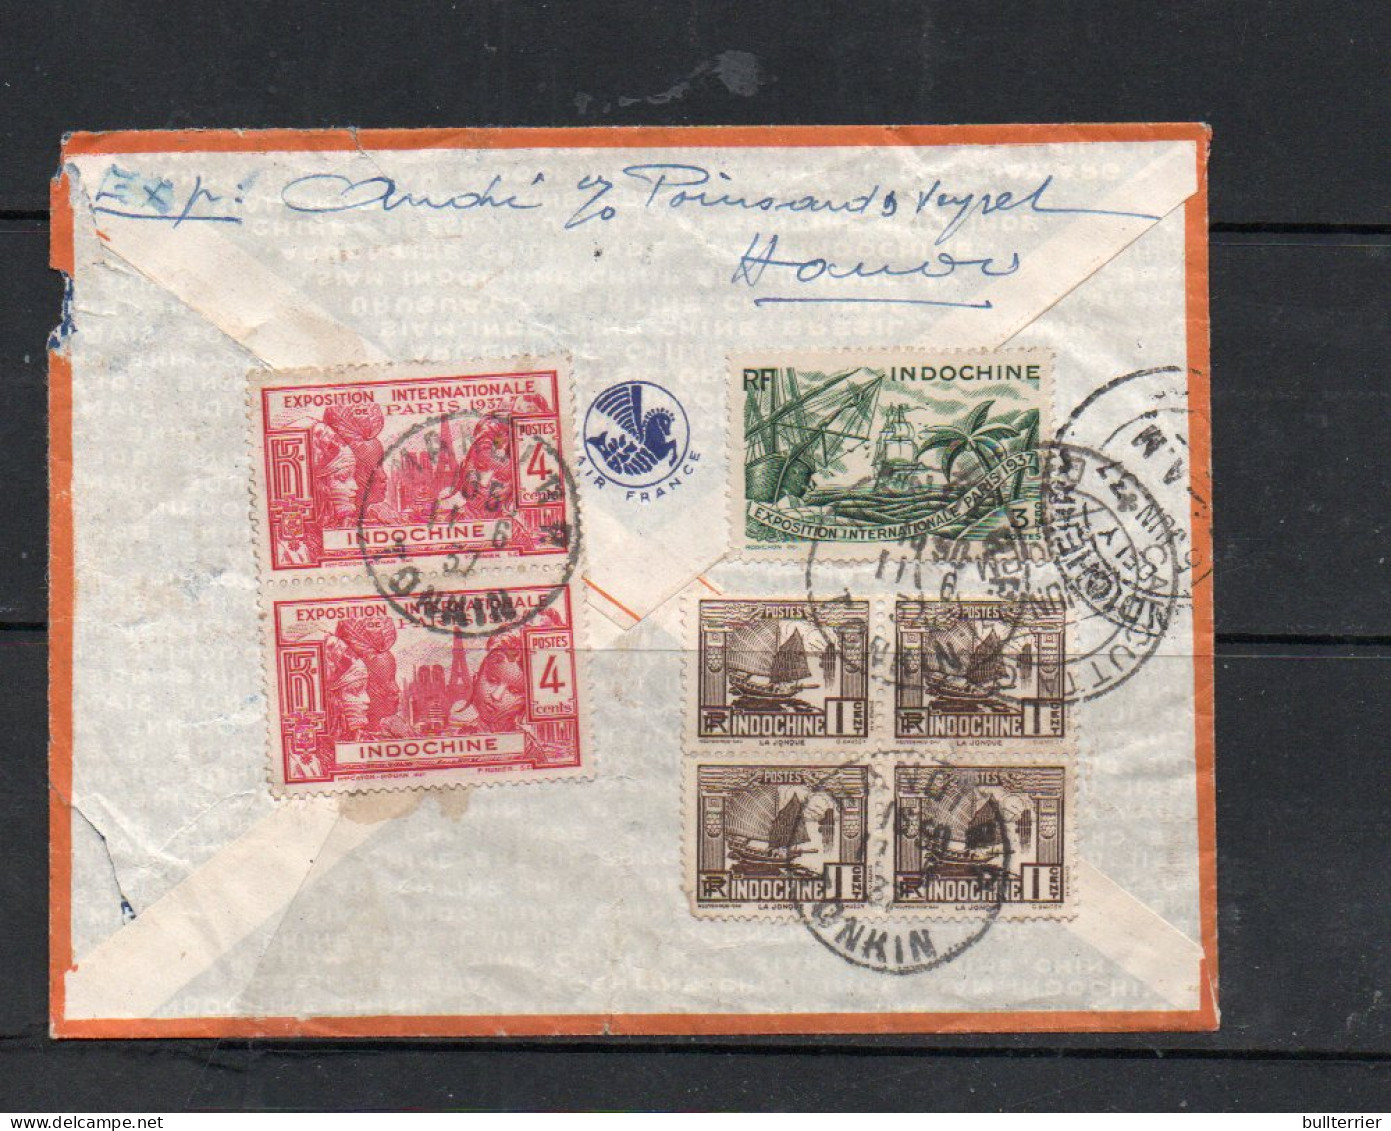 INDOCHINA - 1937 - AIRMAIL COVER HANOI TO PONDICHERRY FRENCH INDIA WITH BACKSTAMPS - Aéreo